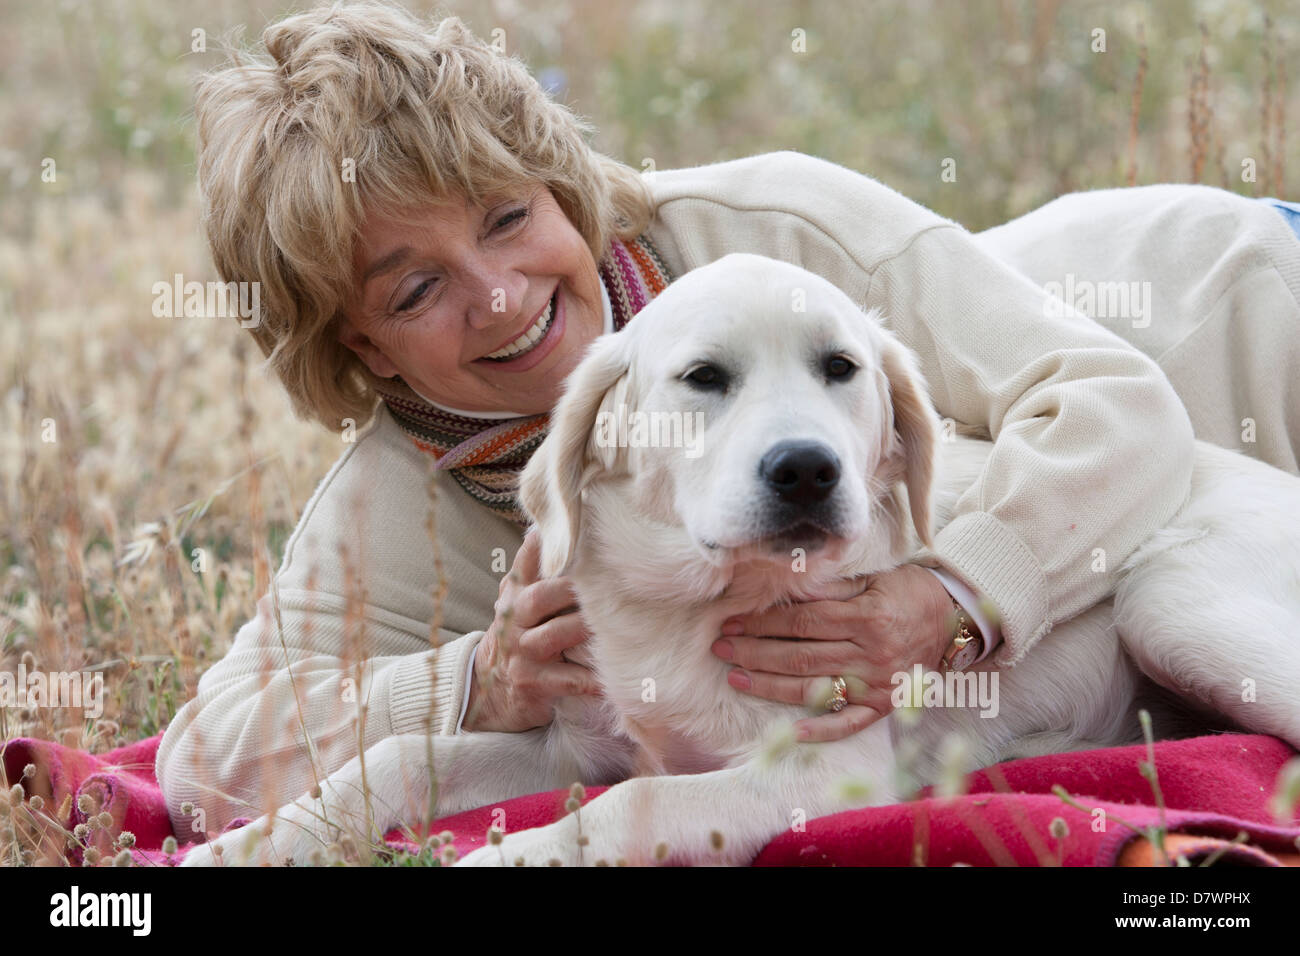 Elederly woman lying in a field with her dog Stock Photo